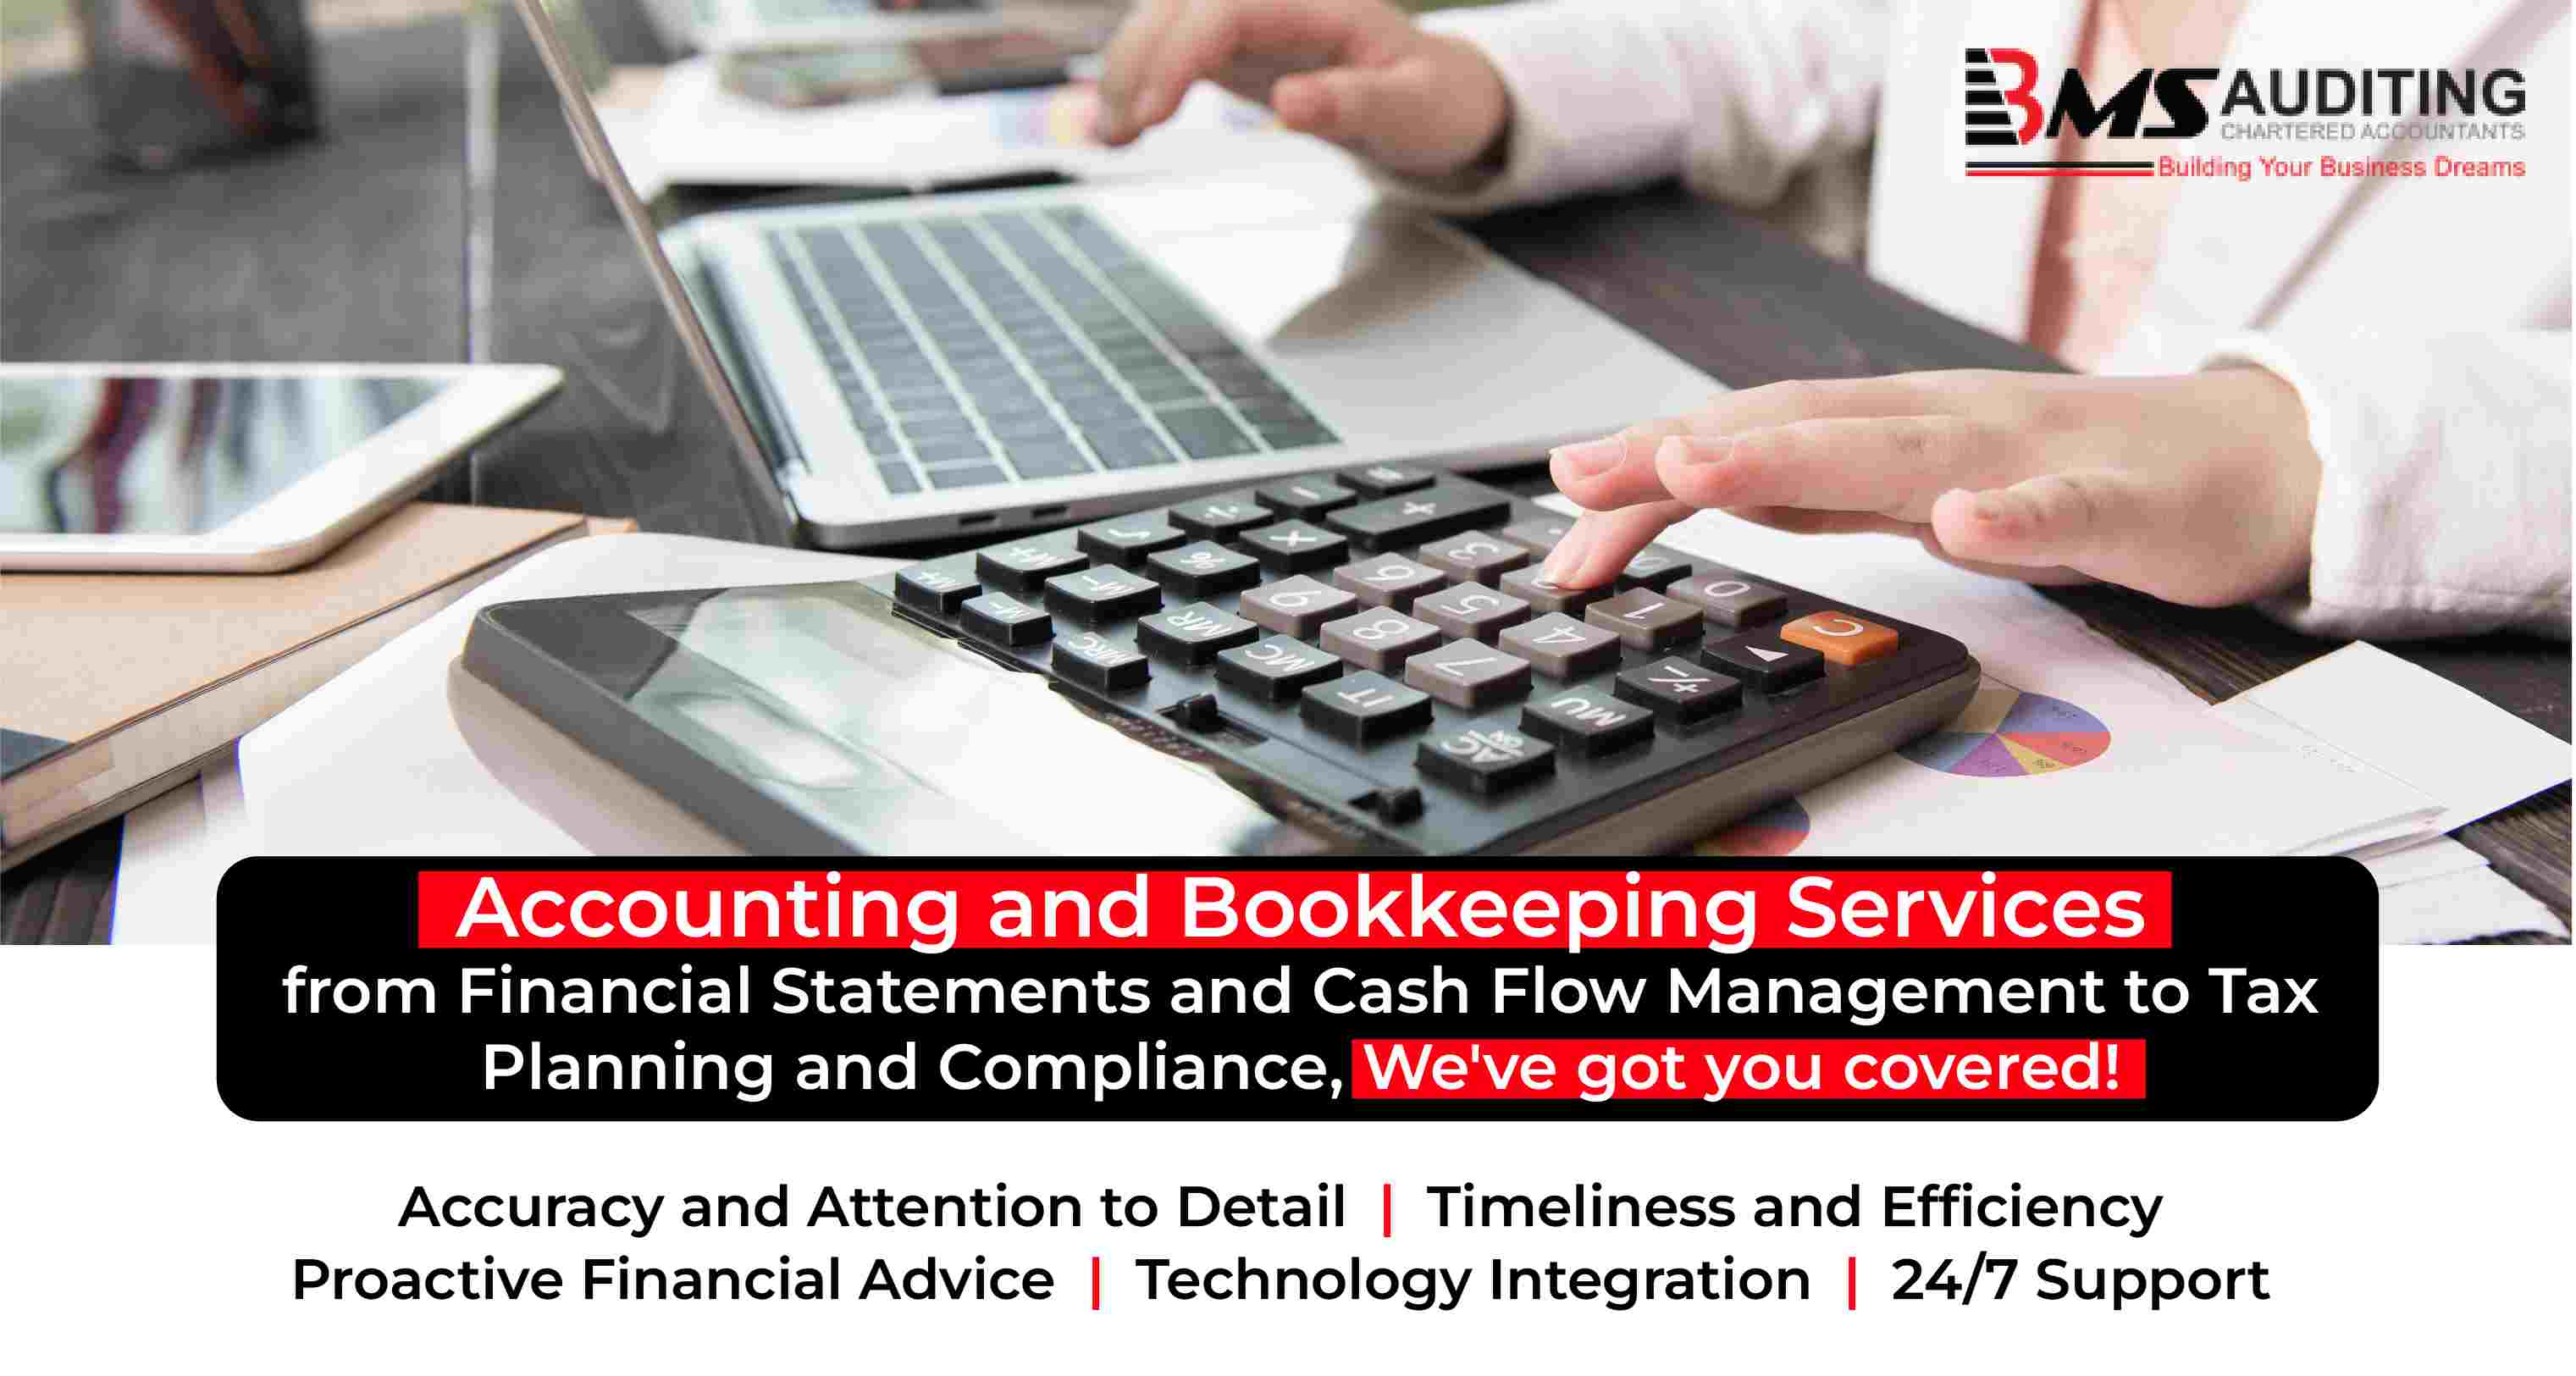 image with text describing the major significances of Accounting and Bookkeeping services by BMS Auditing